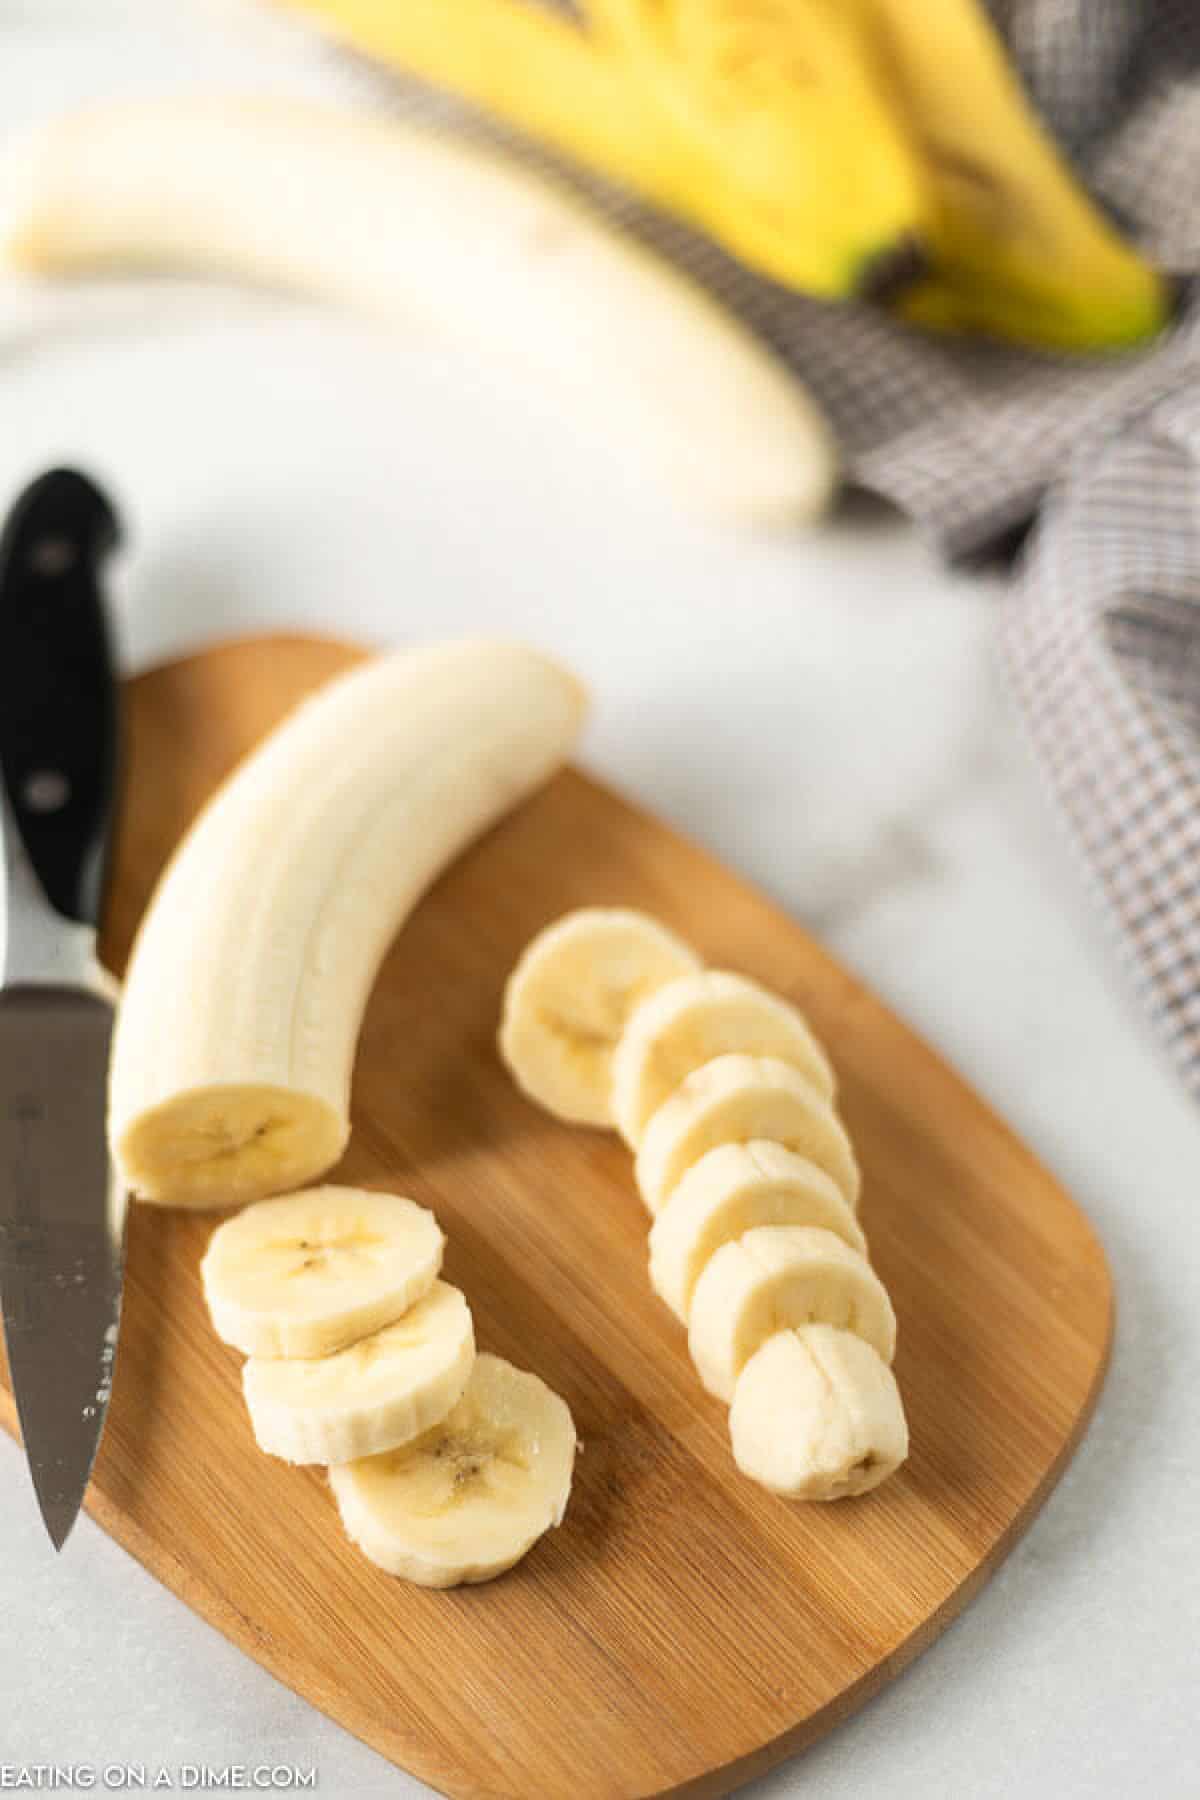 Slice bananas on a cutting board with a knife